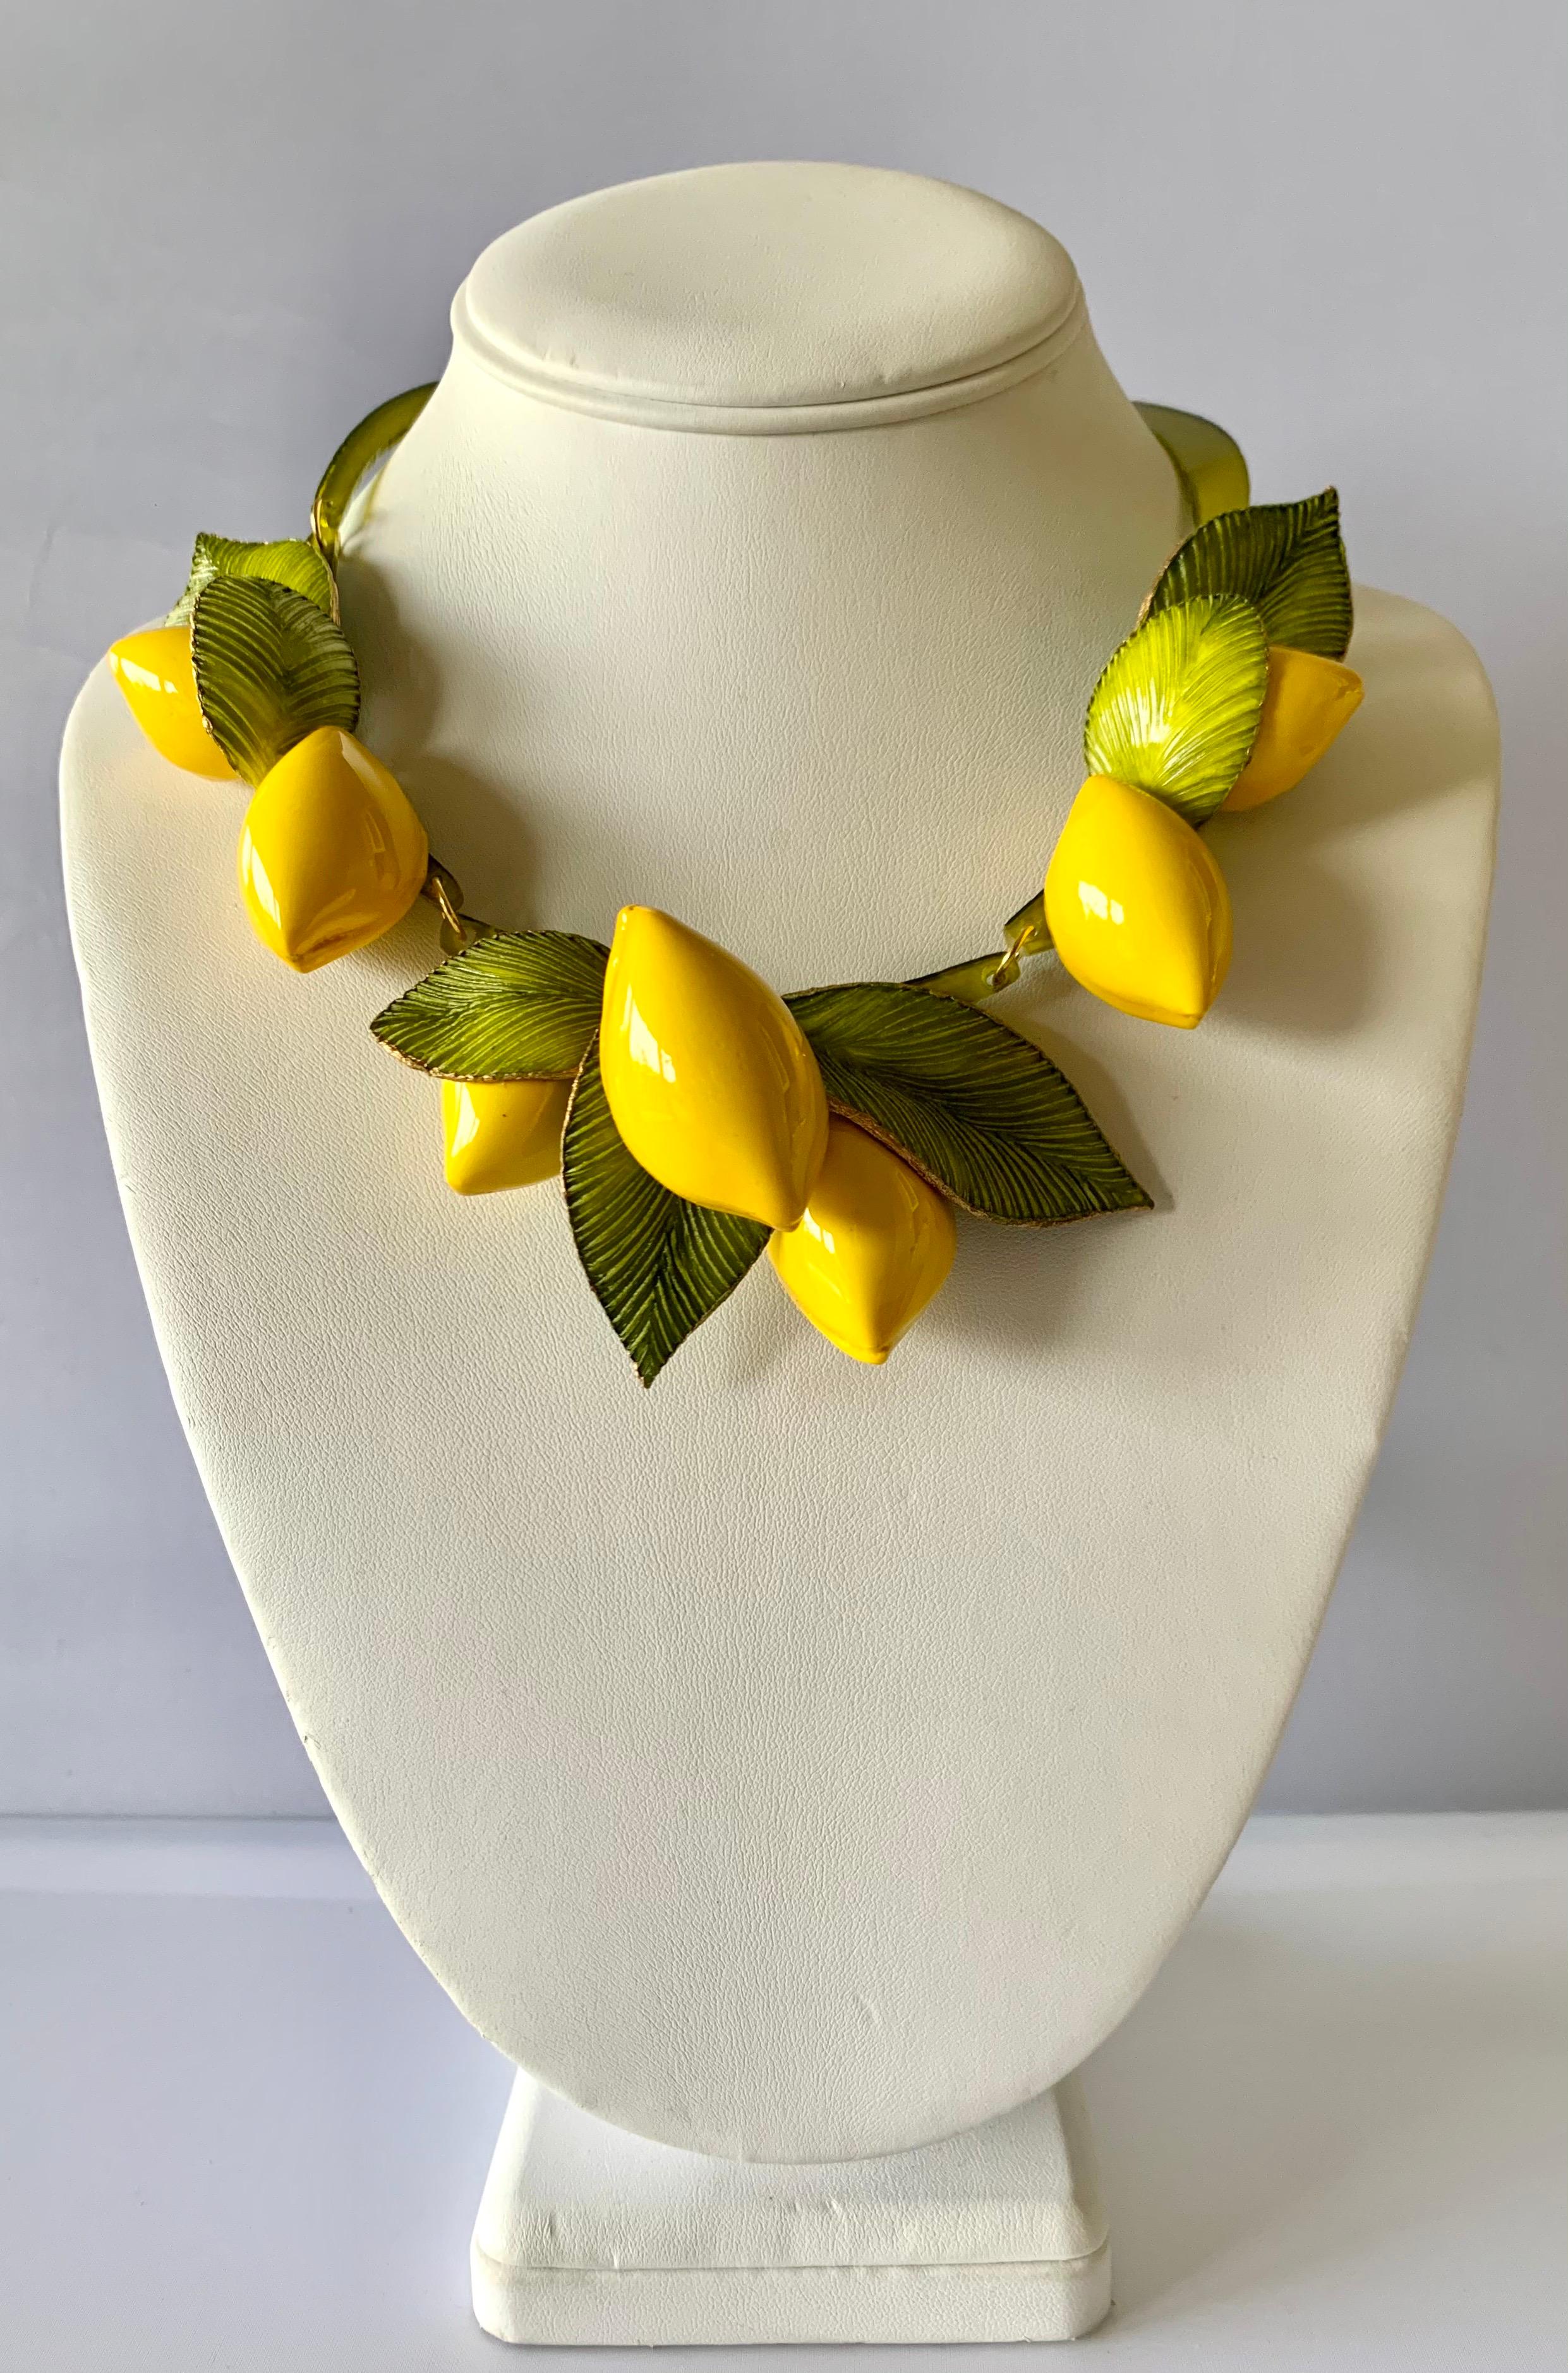 Contemporary fashion-forward giant lemon statement necklace - the bold necklace is comprised out of a row of highly adorned enameline (resin and enamel) yellow lemons. The oversized lemons feature hand-manipulated and etched acrylic details.